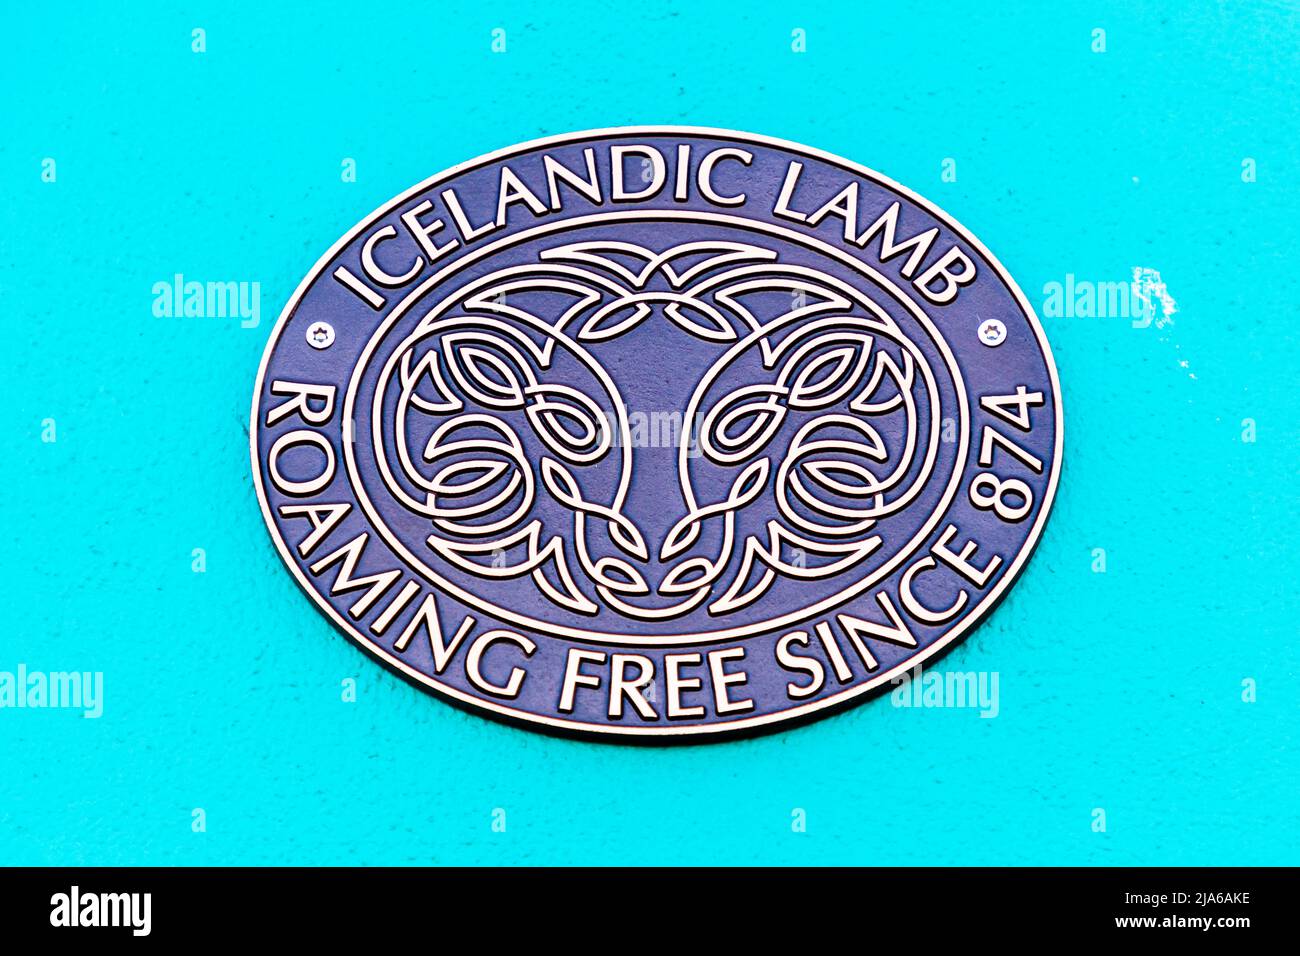 Wall plaque with the inscription: Icelandic Lamb - Roaming free since 874 (Reykjavik, Iceland) Stock Photo